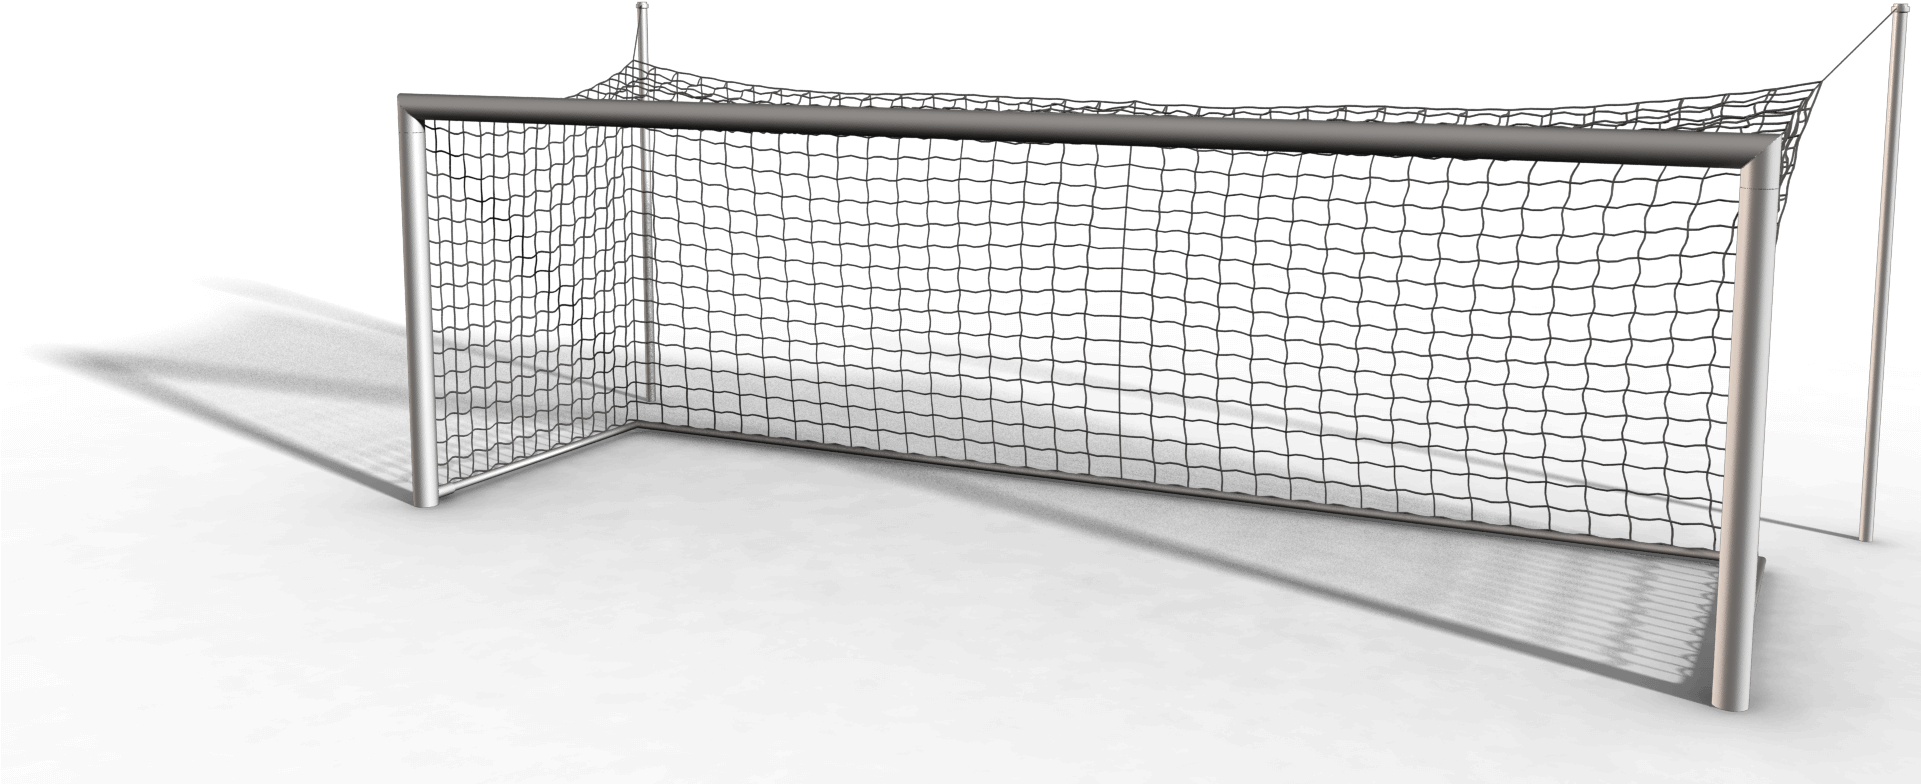 Football Goal Png - Fixed Aluminium Soccer Goal Full-size W/ Sleeves (1920x1080), Png Download